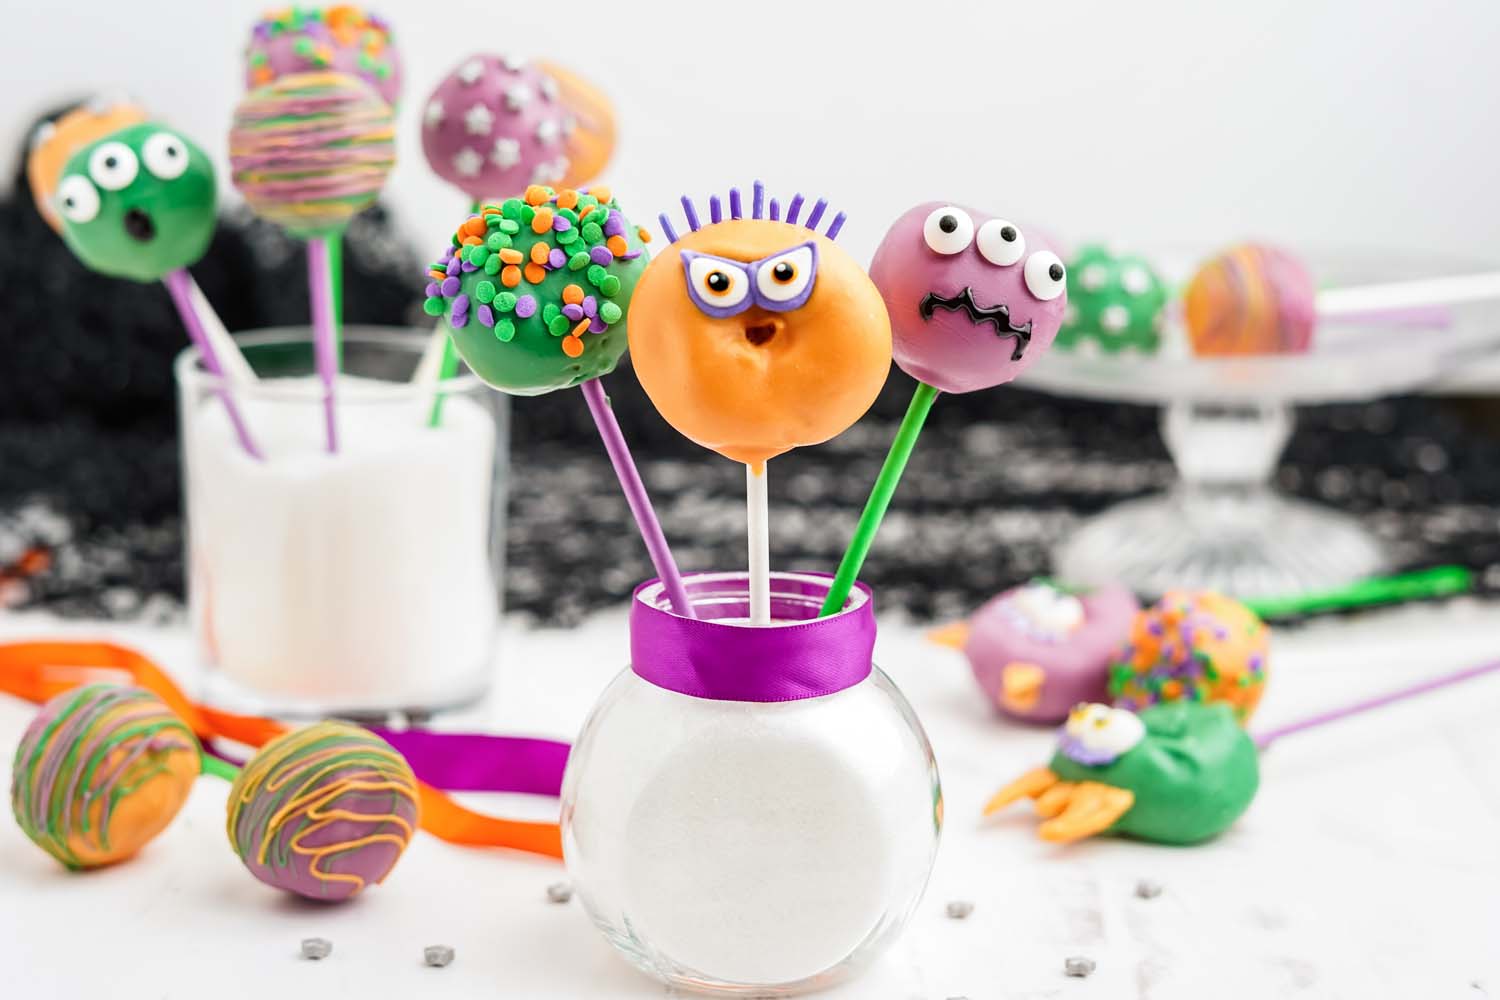 donut hole cake pops made into monster faces for halloween 